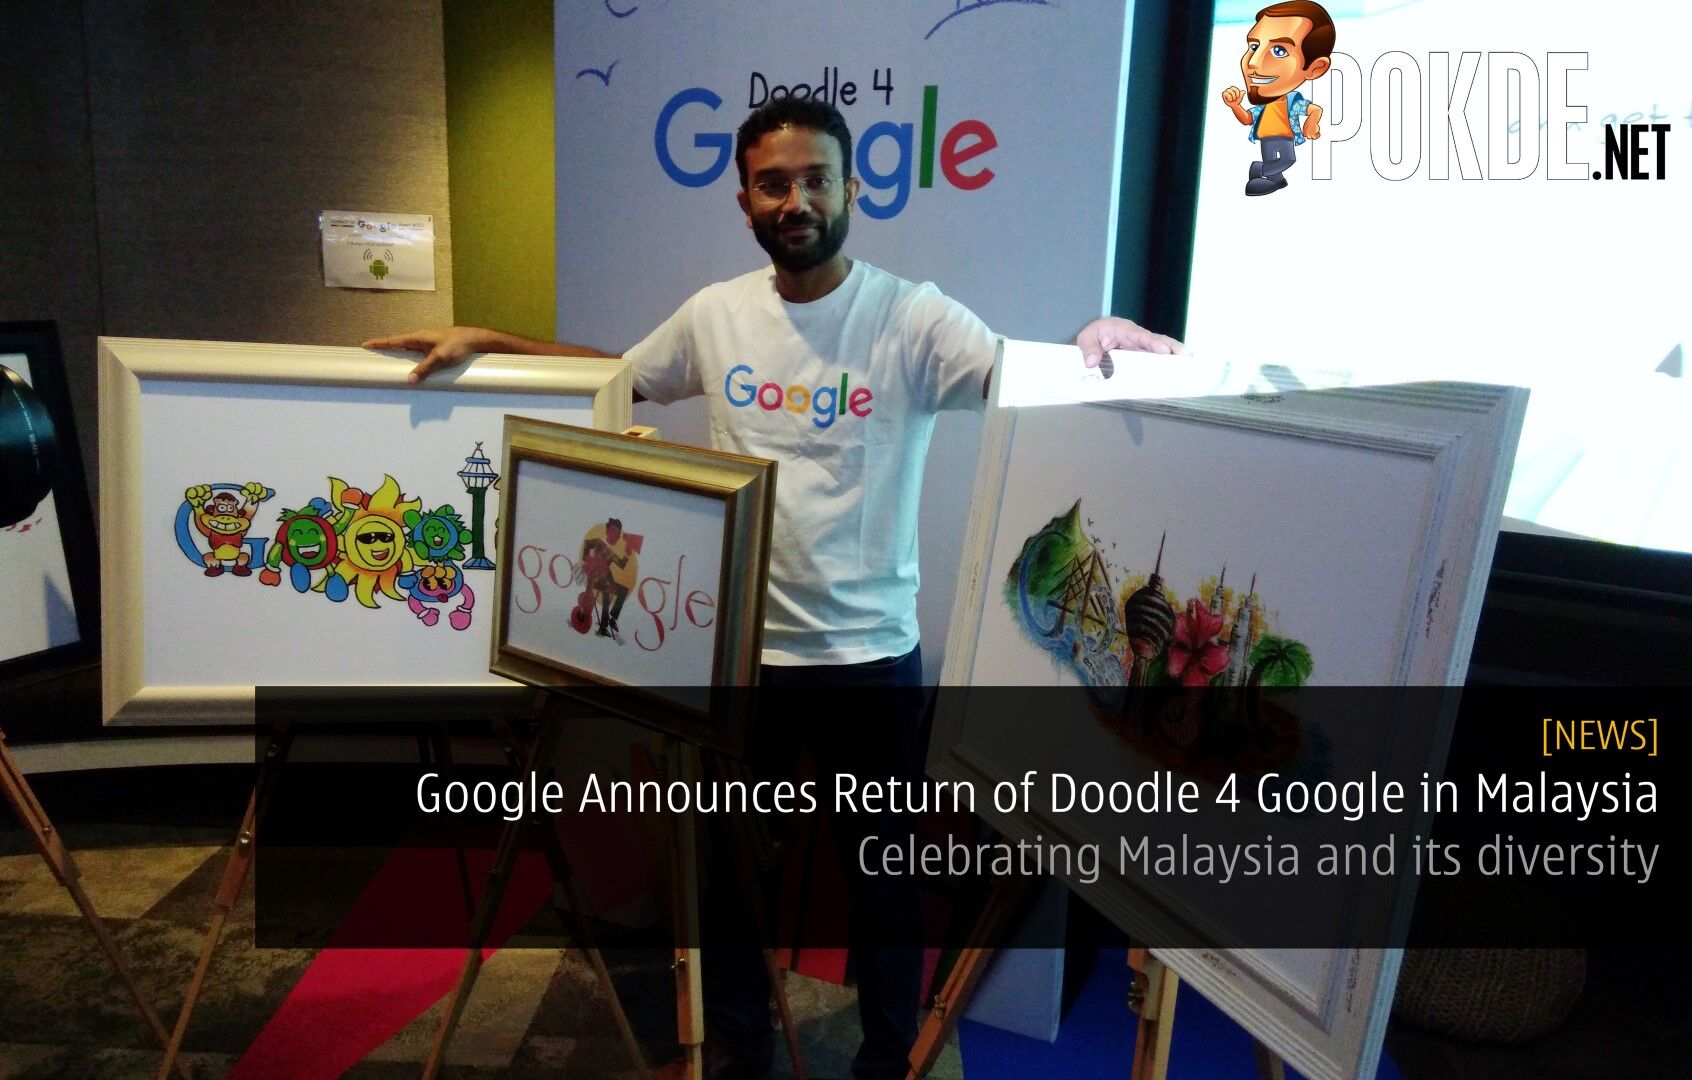 Google Announces Return of Doodle 4 Google in Malaysia - Celebrating Malaysia and its diversity 24